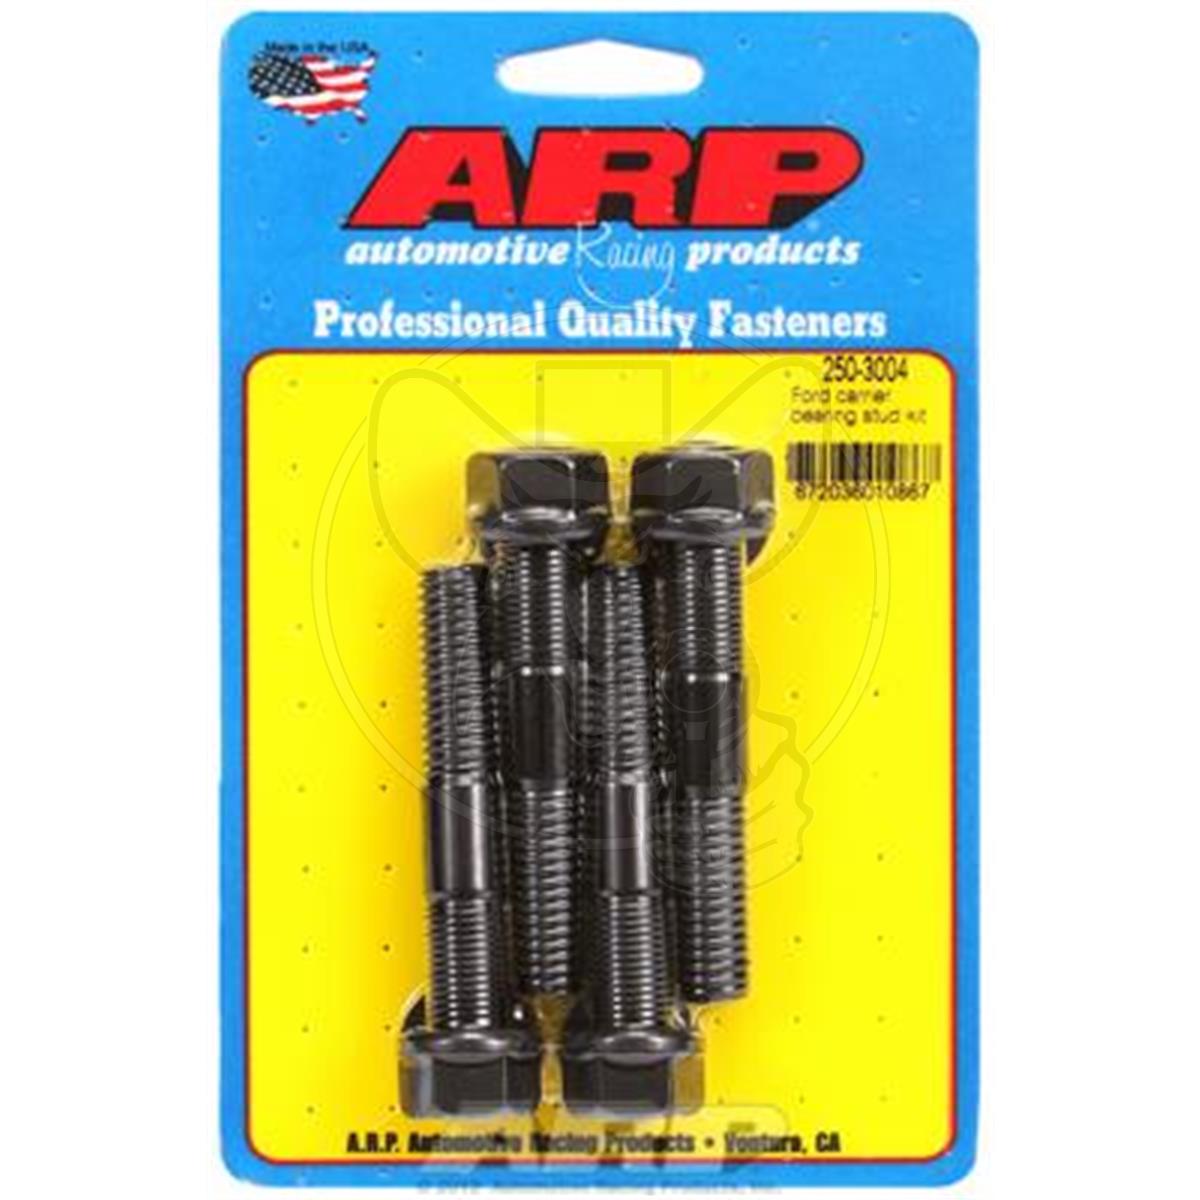 ARP CARRIER BEARING STUD KIT FITS FORD 9" DIFFERENTIAL